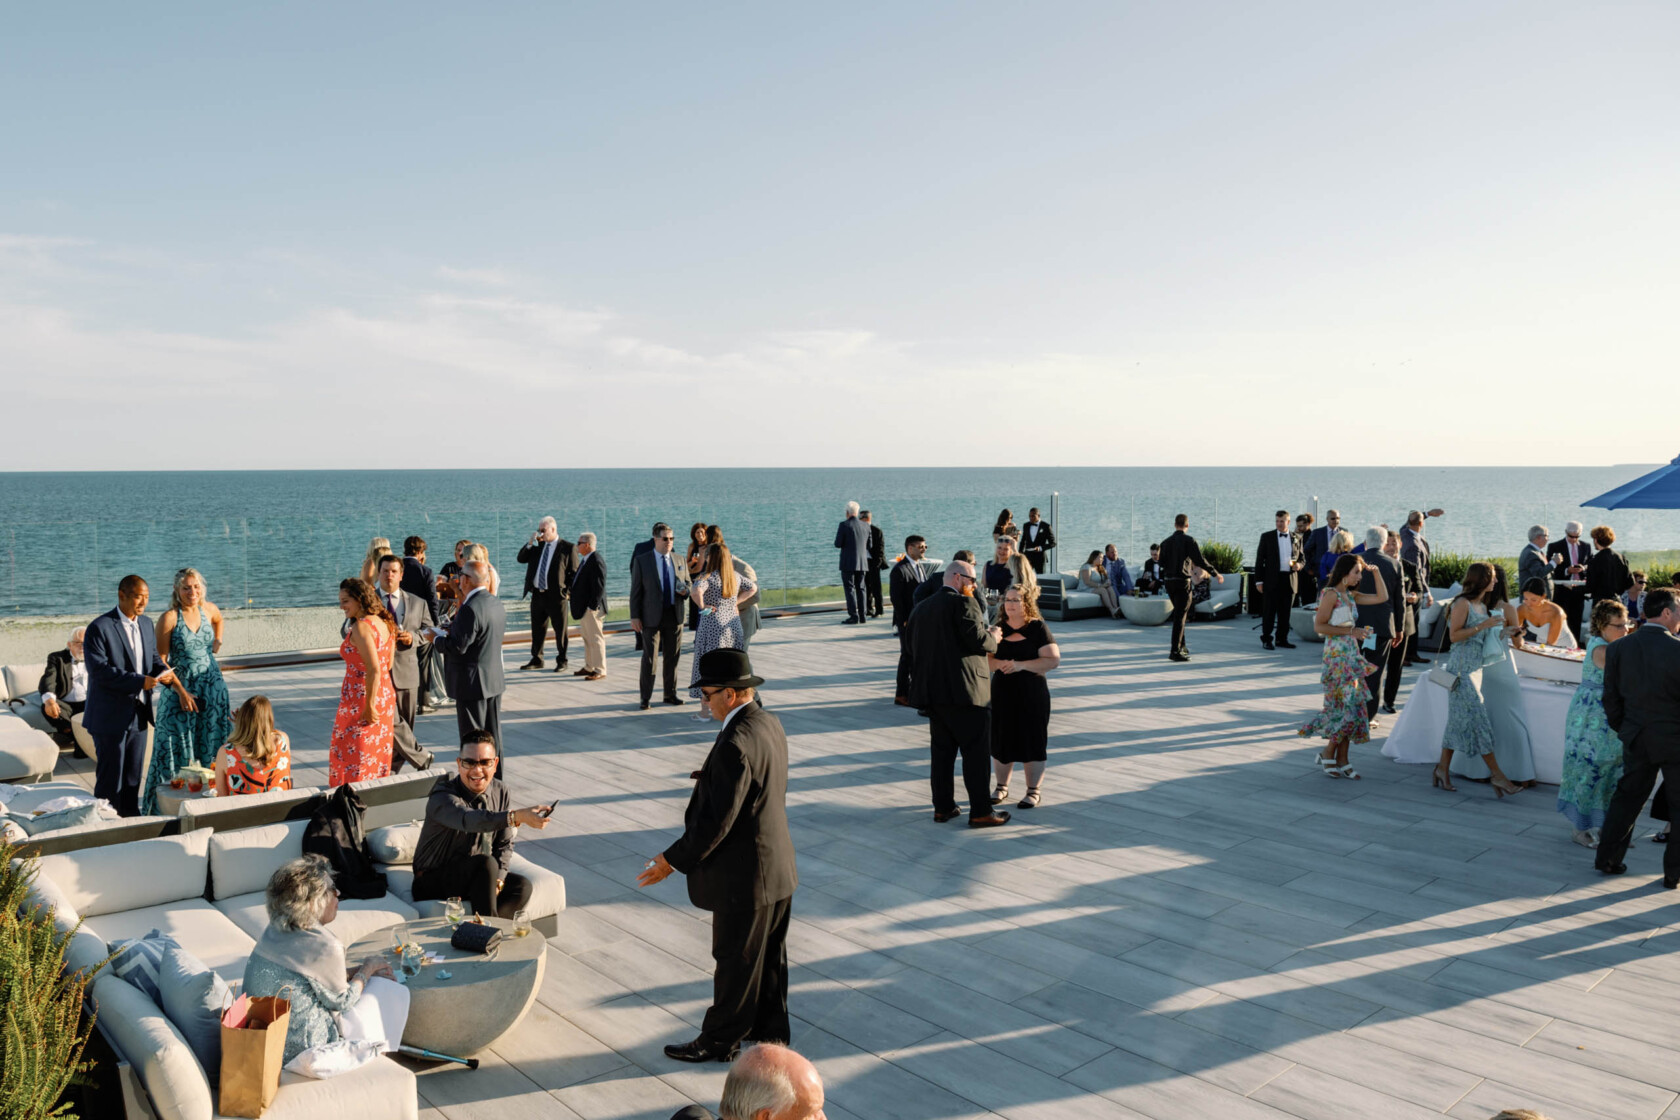 An event on a rooftop deck by the ocean.